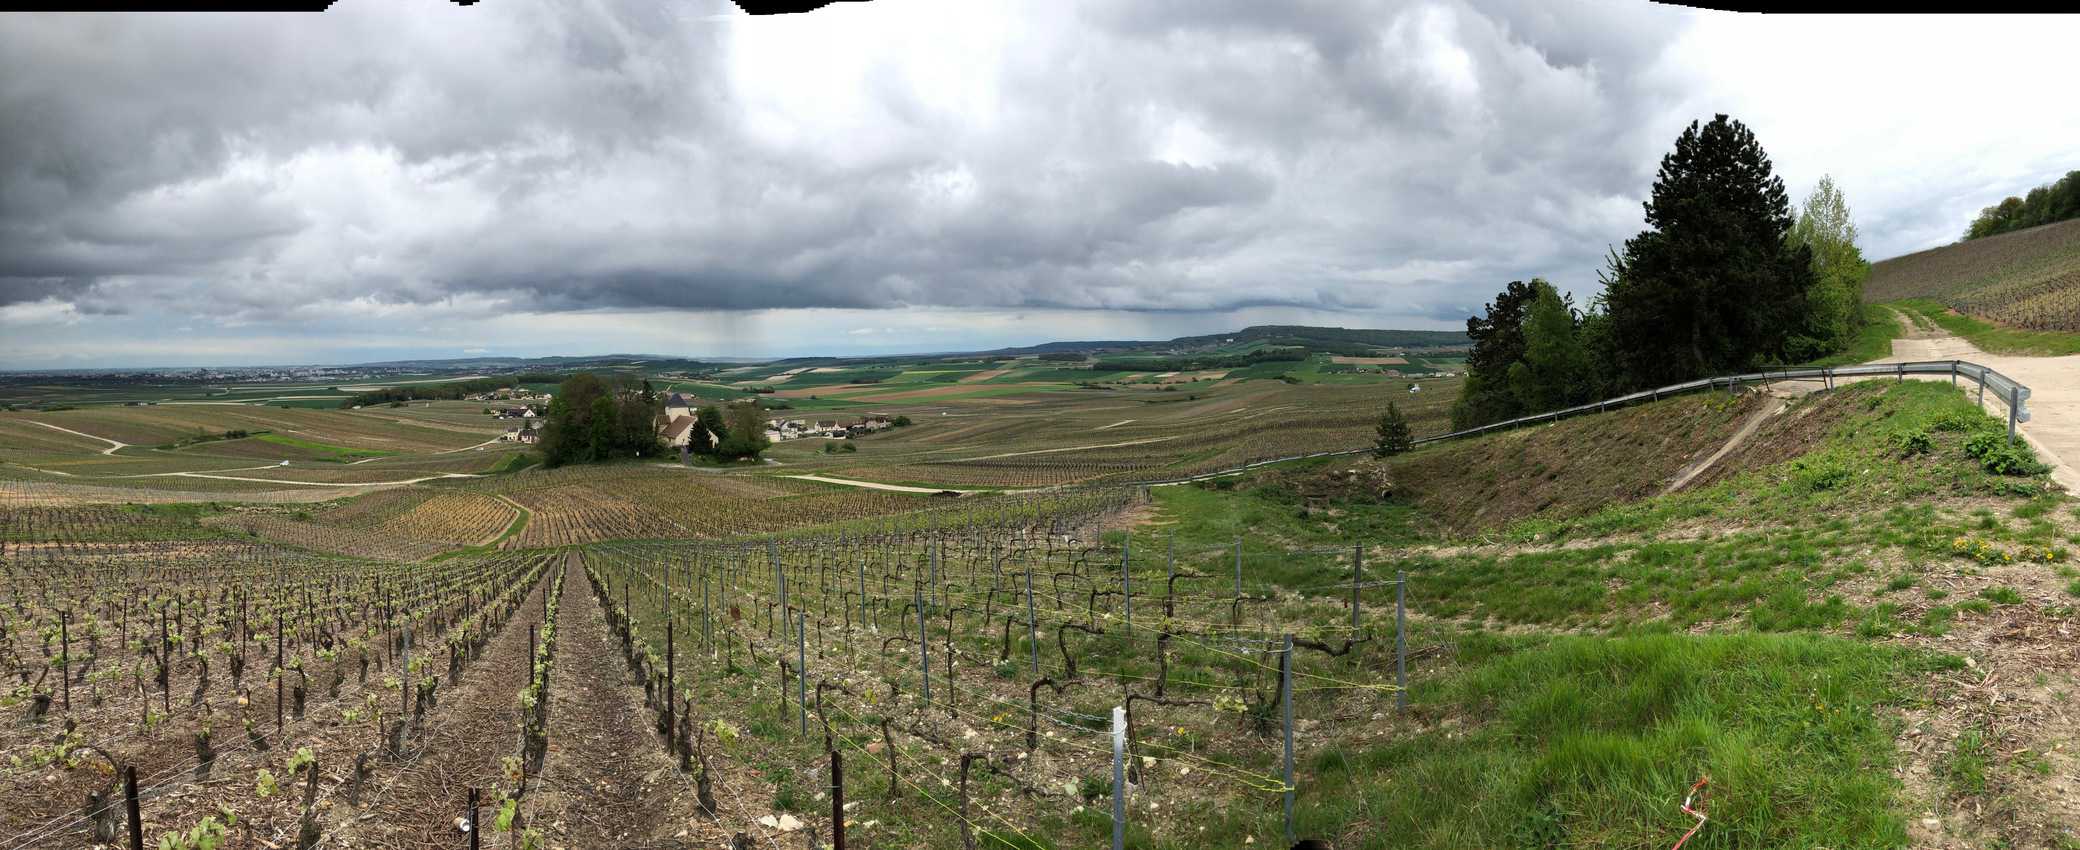 The vineyards stretch for miles in every direction outside of Reims, France.